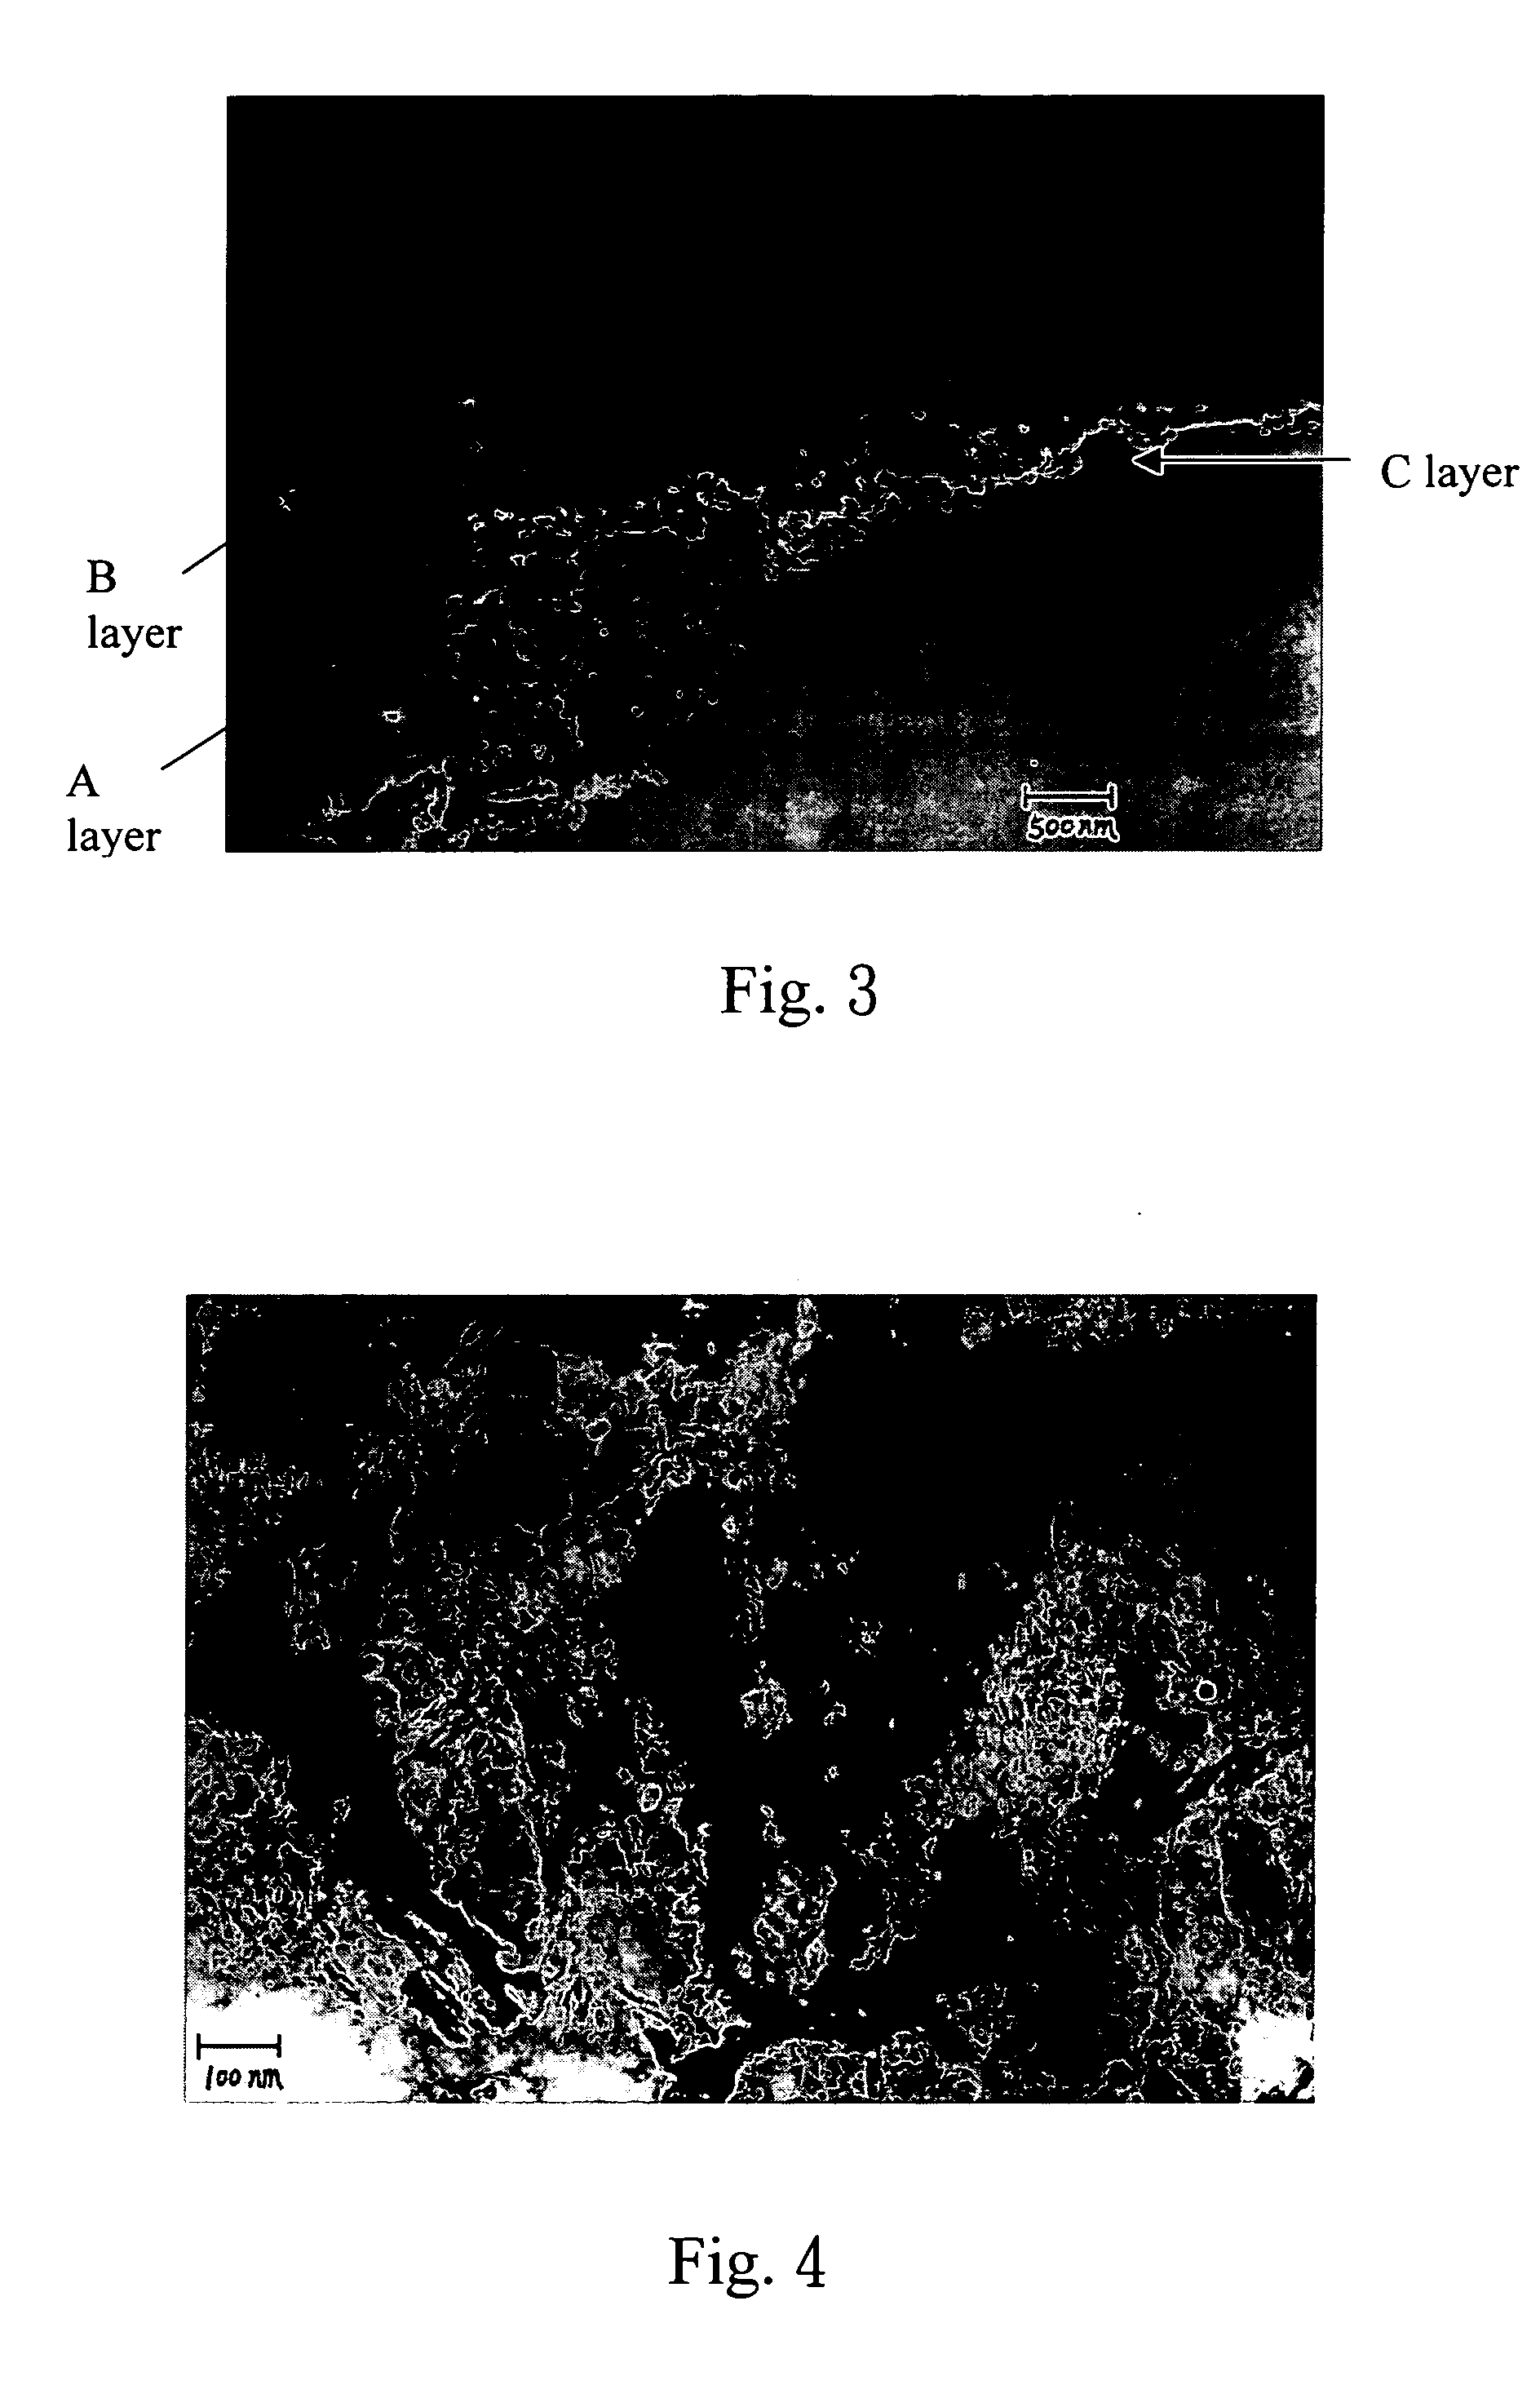 Method for treating surface of magnesium or magnesium alloy